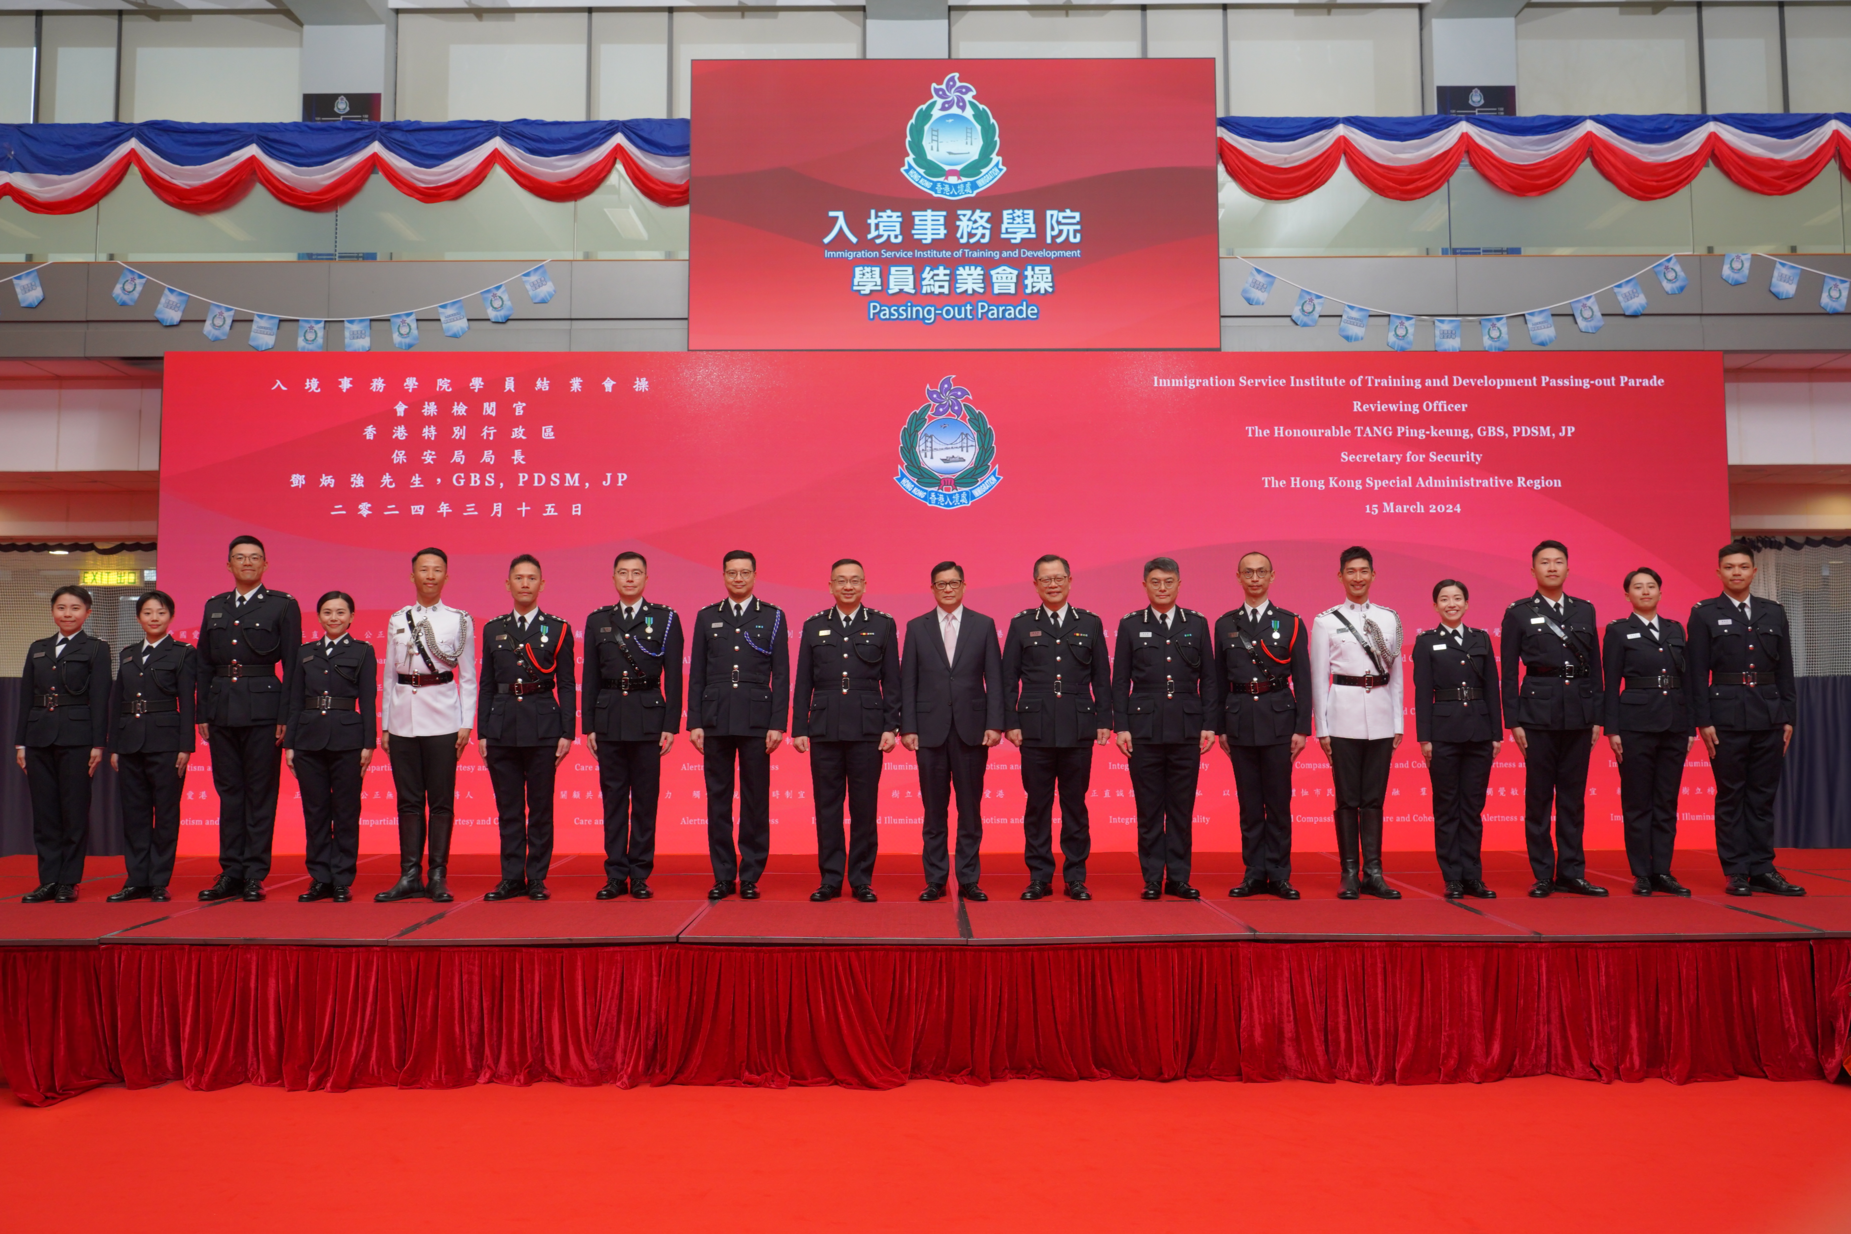 The Secretary for Security, Mr Tang Ping-keung (ninth right), is pictured with graduates awarded the "Best Recruit Shields" after the Immigration Service Institute of Training and Development Passing-out Parade today (March 15).